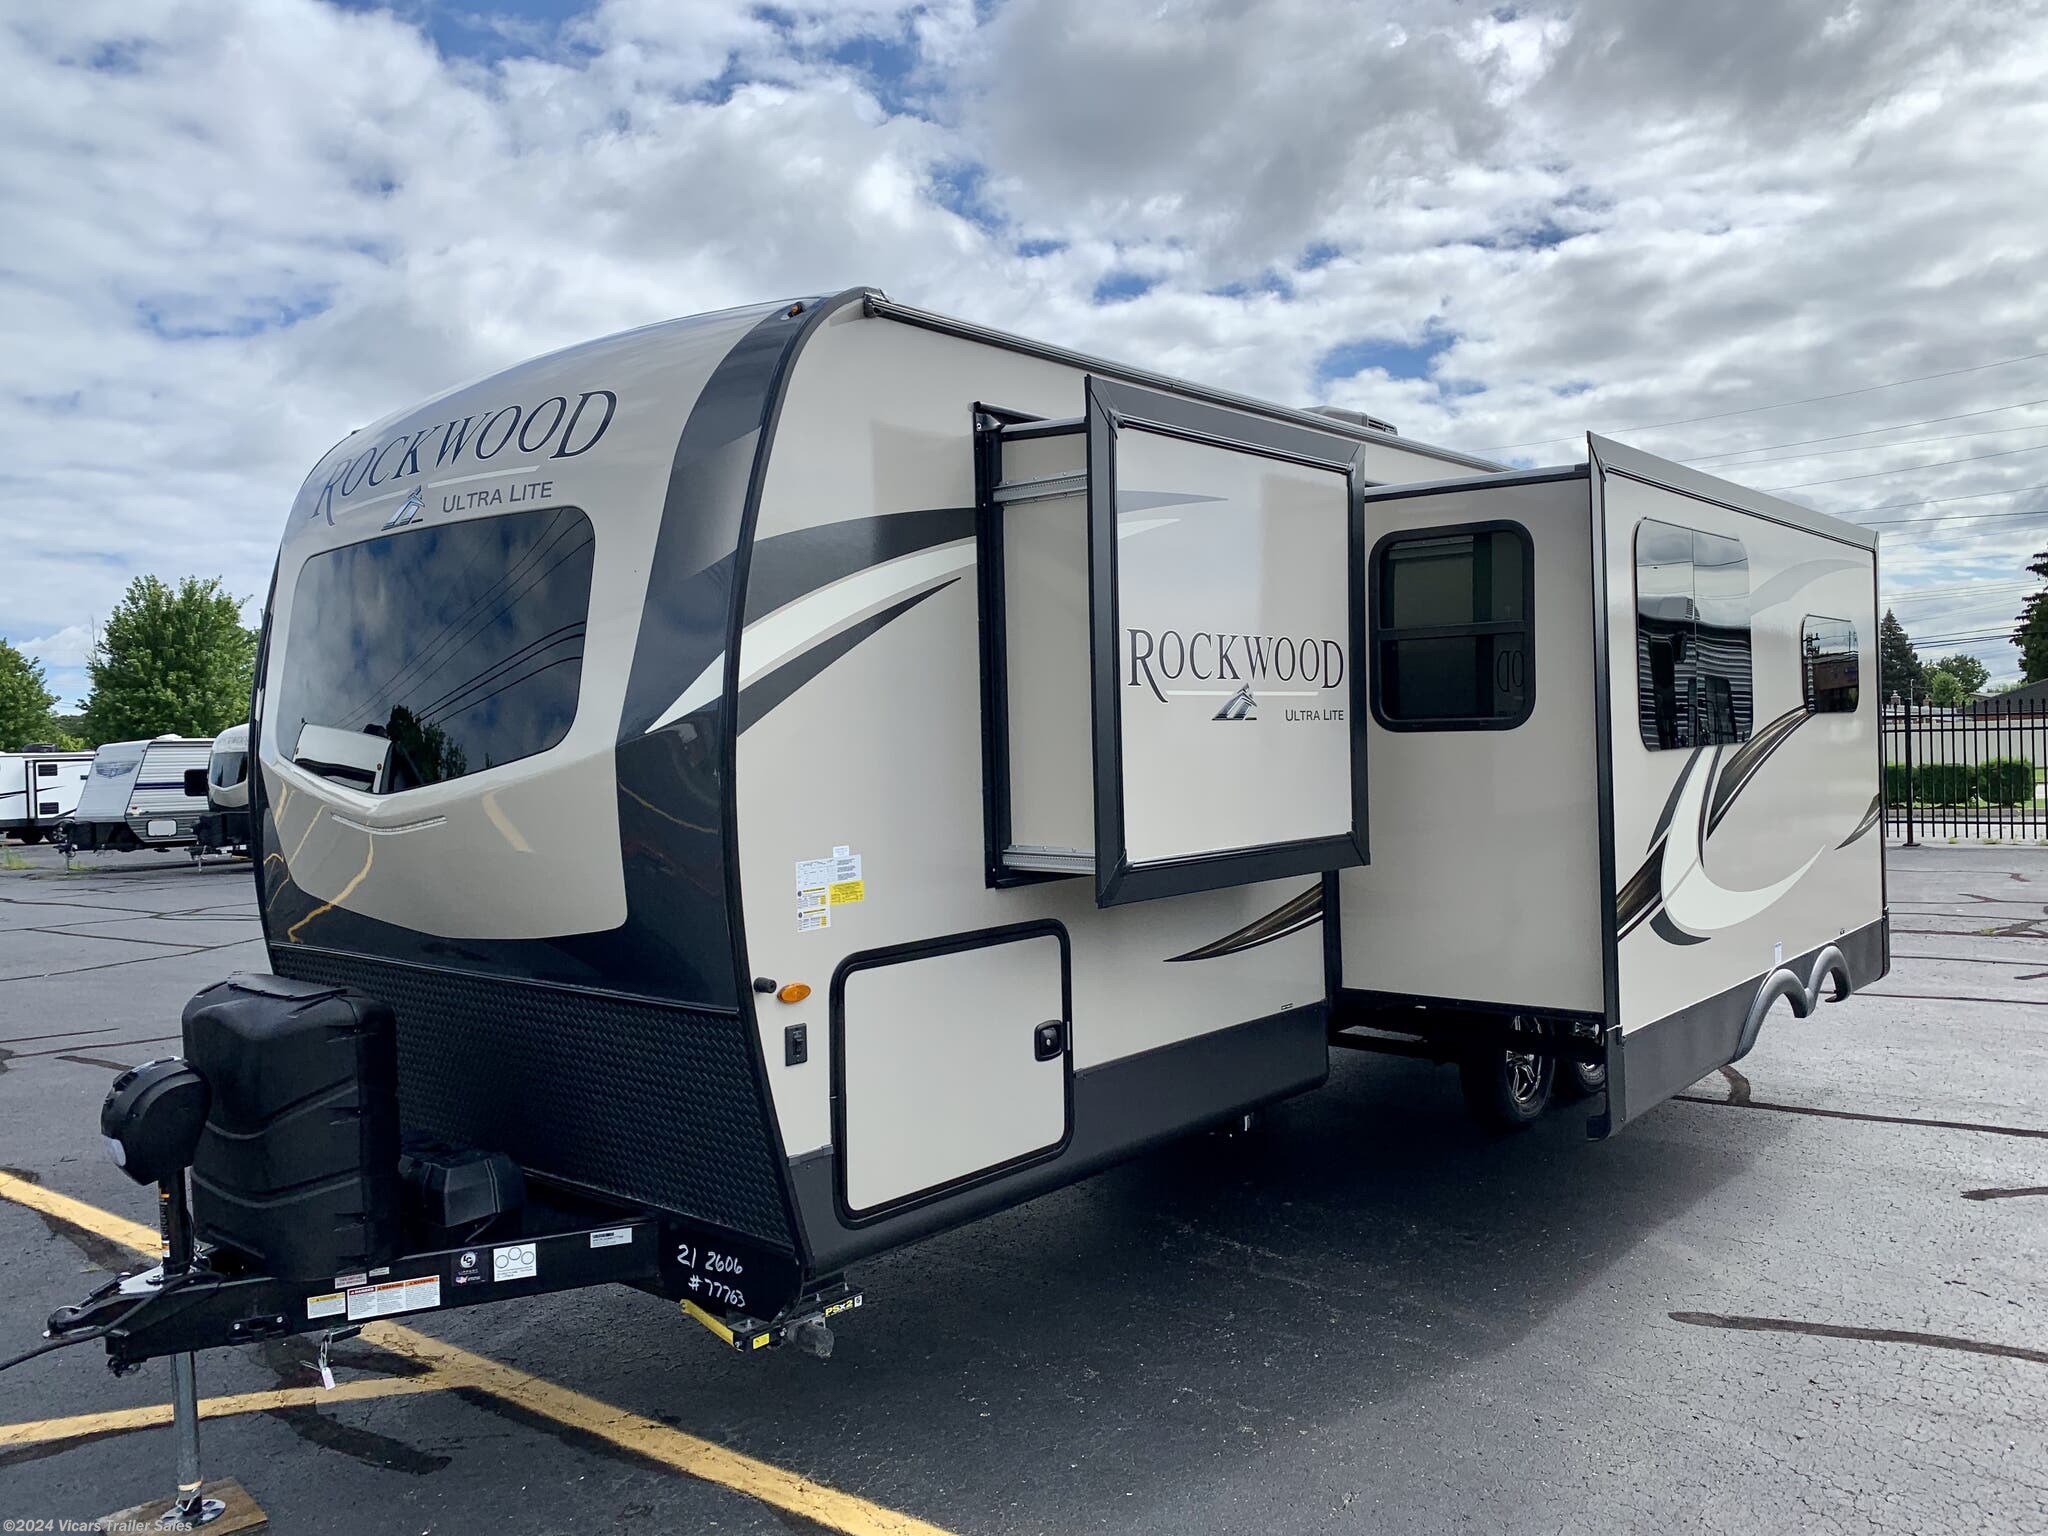 2021 Forest River Rockwood Ultra Lite 2606WS RV for Sale in Taylor, MI 48180 | 77763 | RVUSA.com 2021 Forest River Rockwood Ultra Lite 2606ws